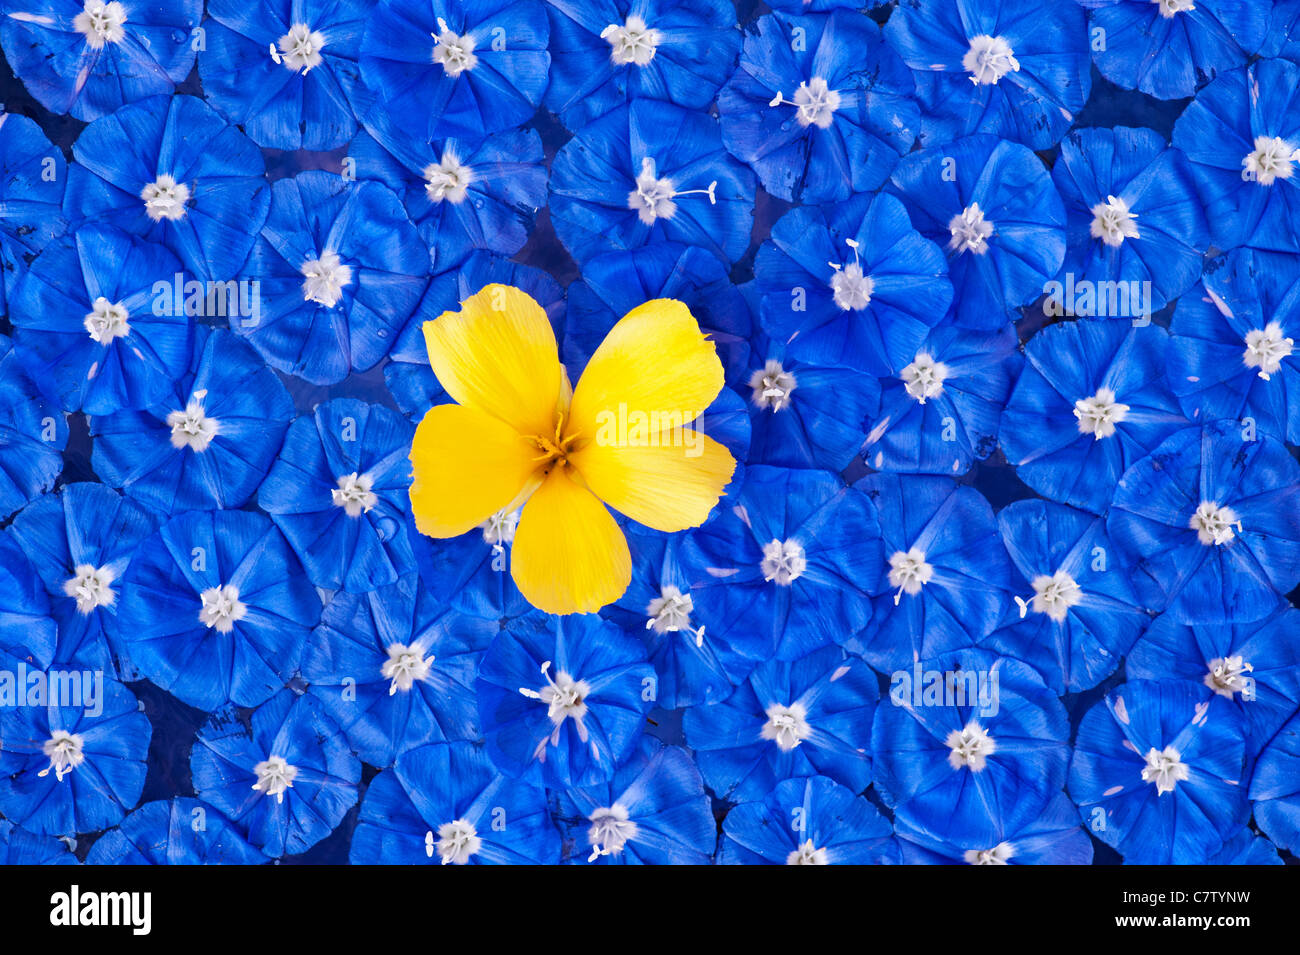 Picked Yellow Alder flower and Skyblue Clustervine flowers floating on water pattern Stock Photo